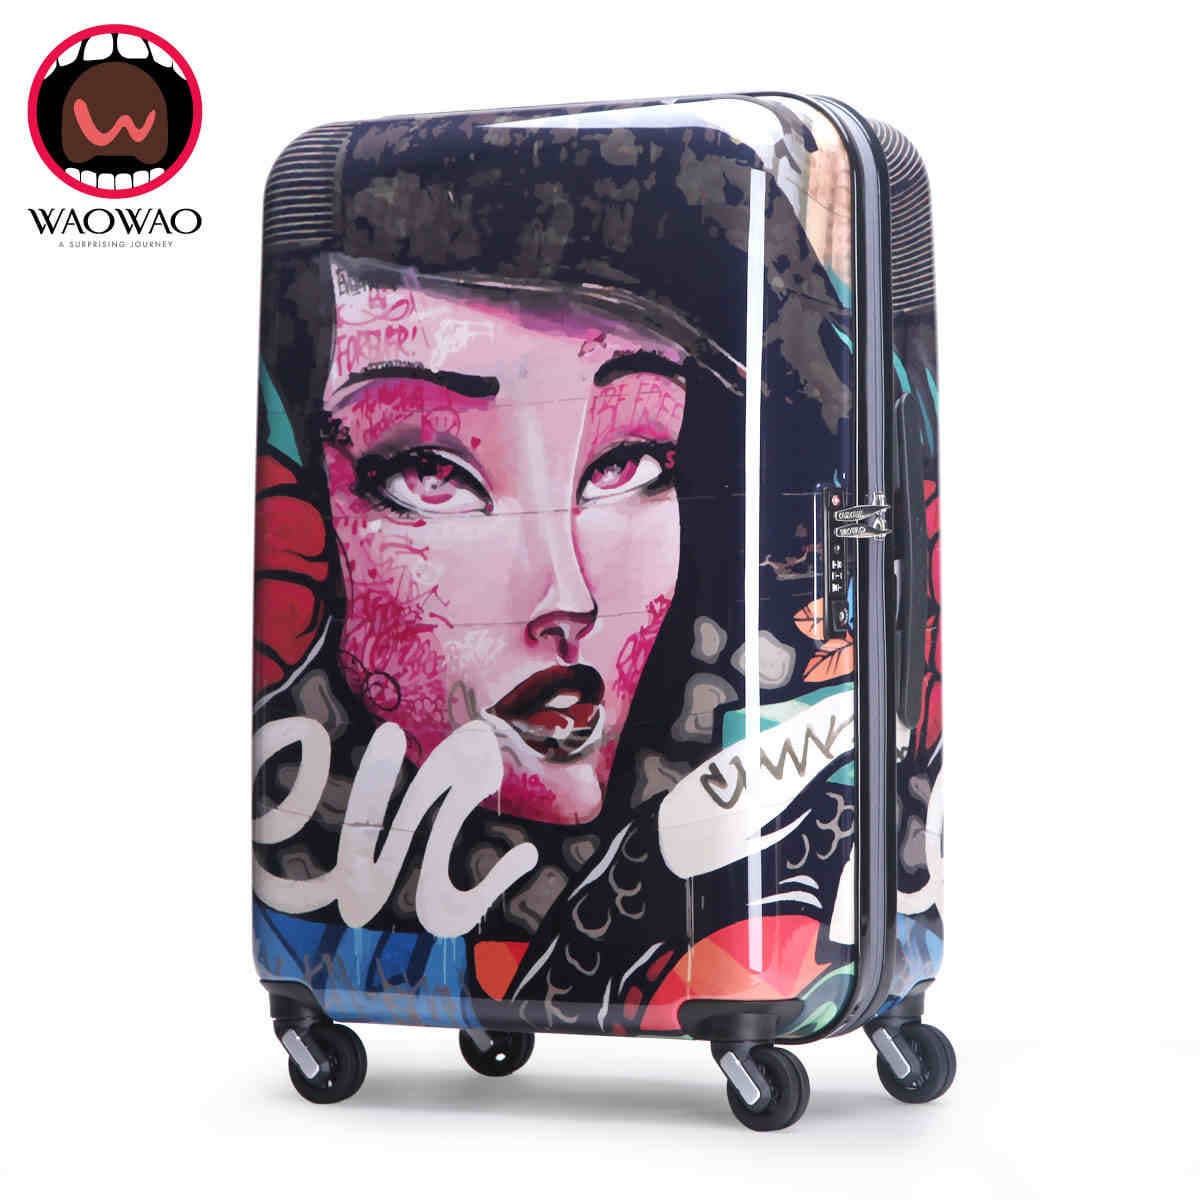 Vintage style ultra lightweight wheeled trolley luggage